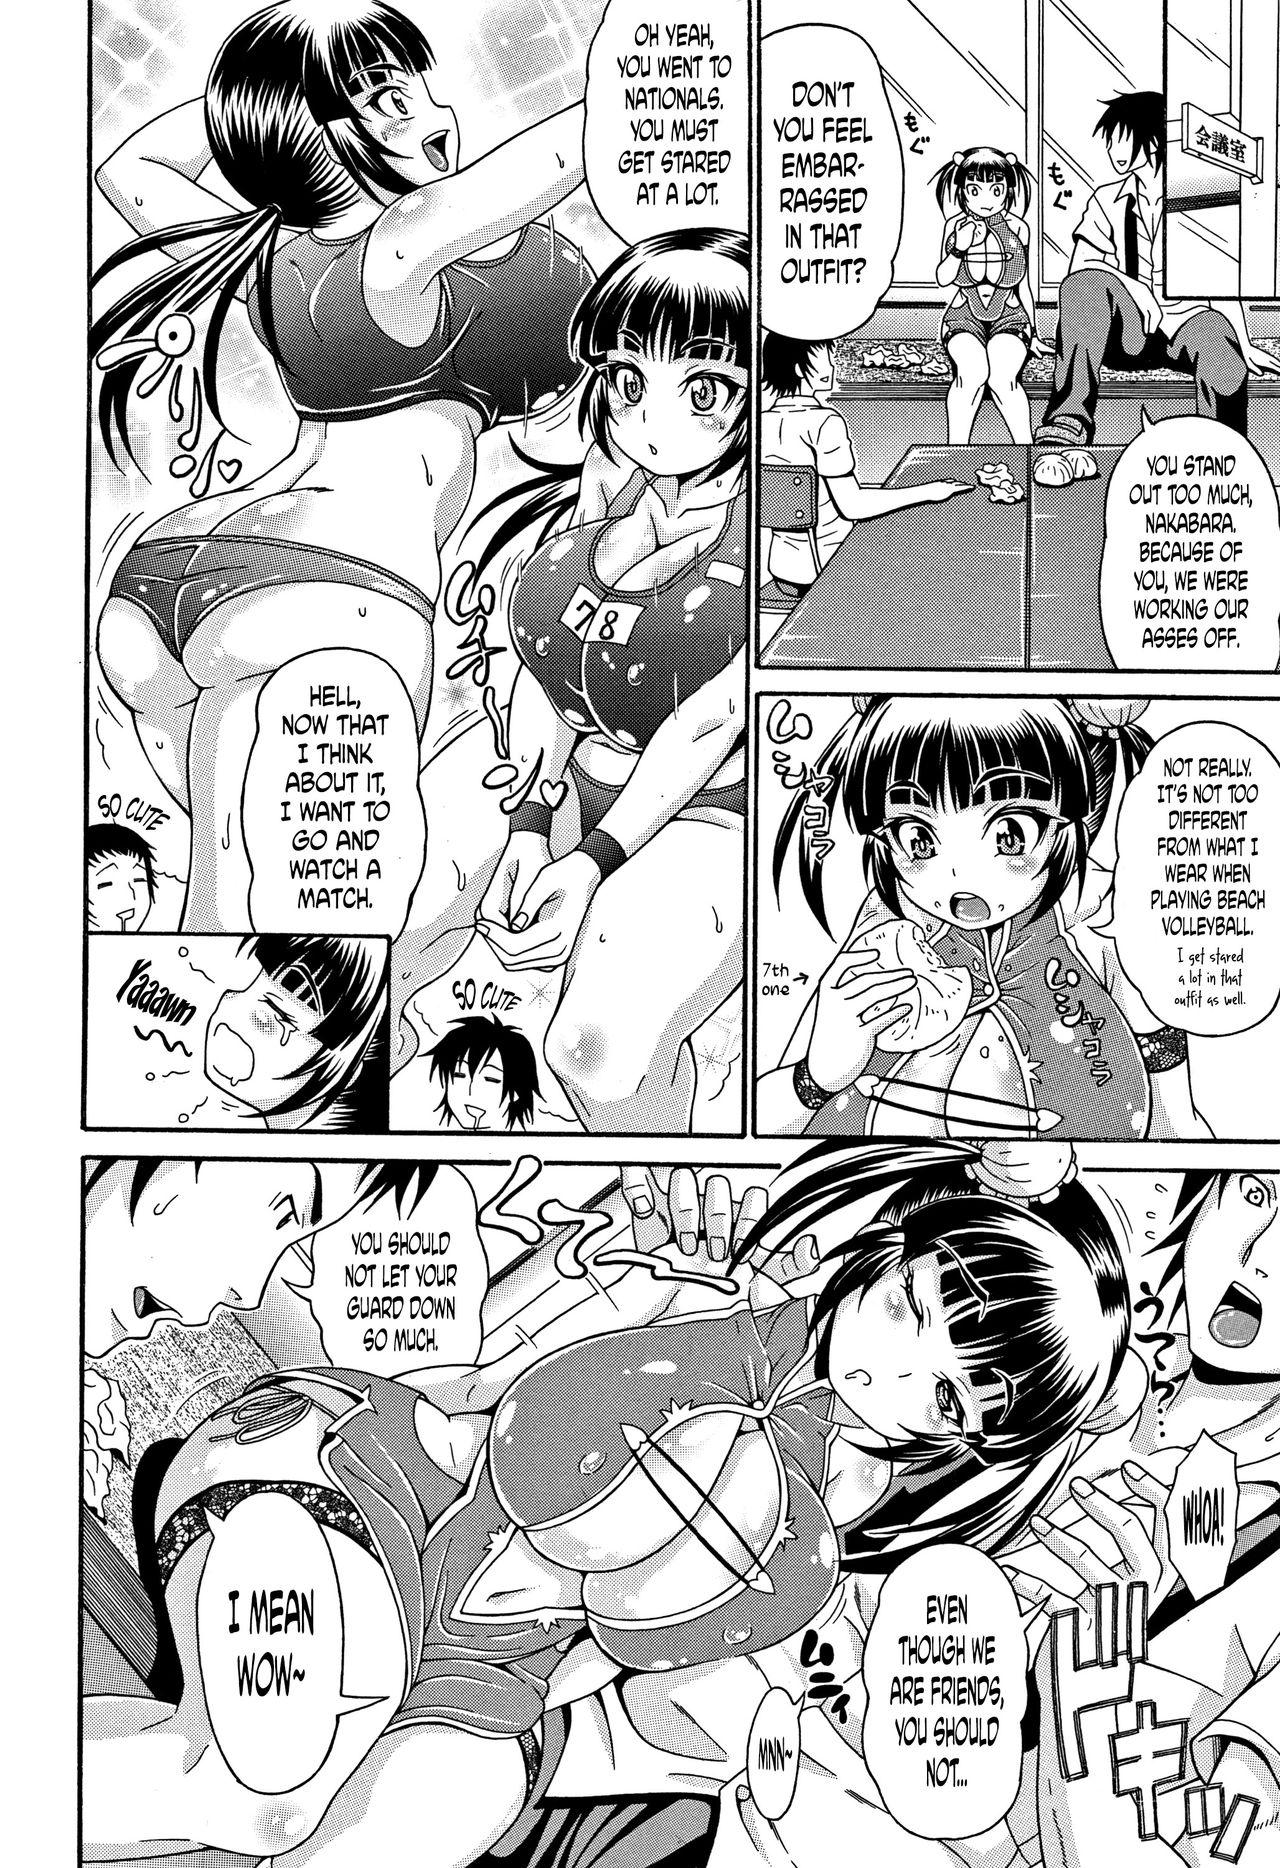 [Andou Hiroyuki] Mamire Chichi - Sticky Tits Feel Hot All Over. Ch.1-9 [English] [doujin-moe.us] 92